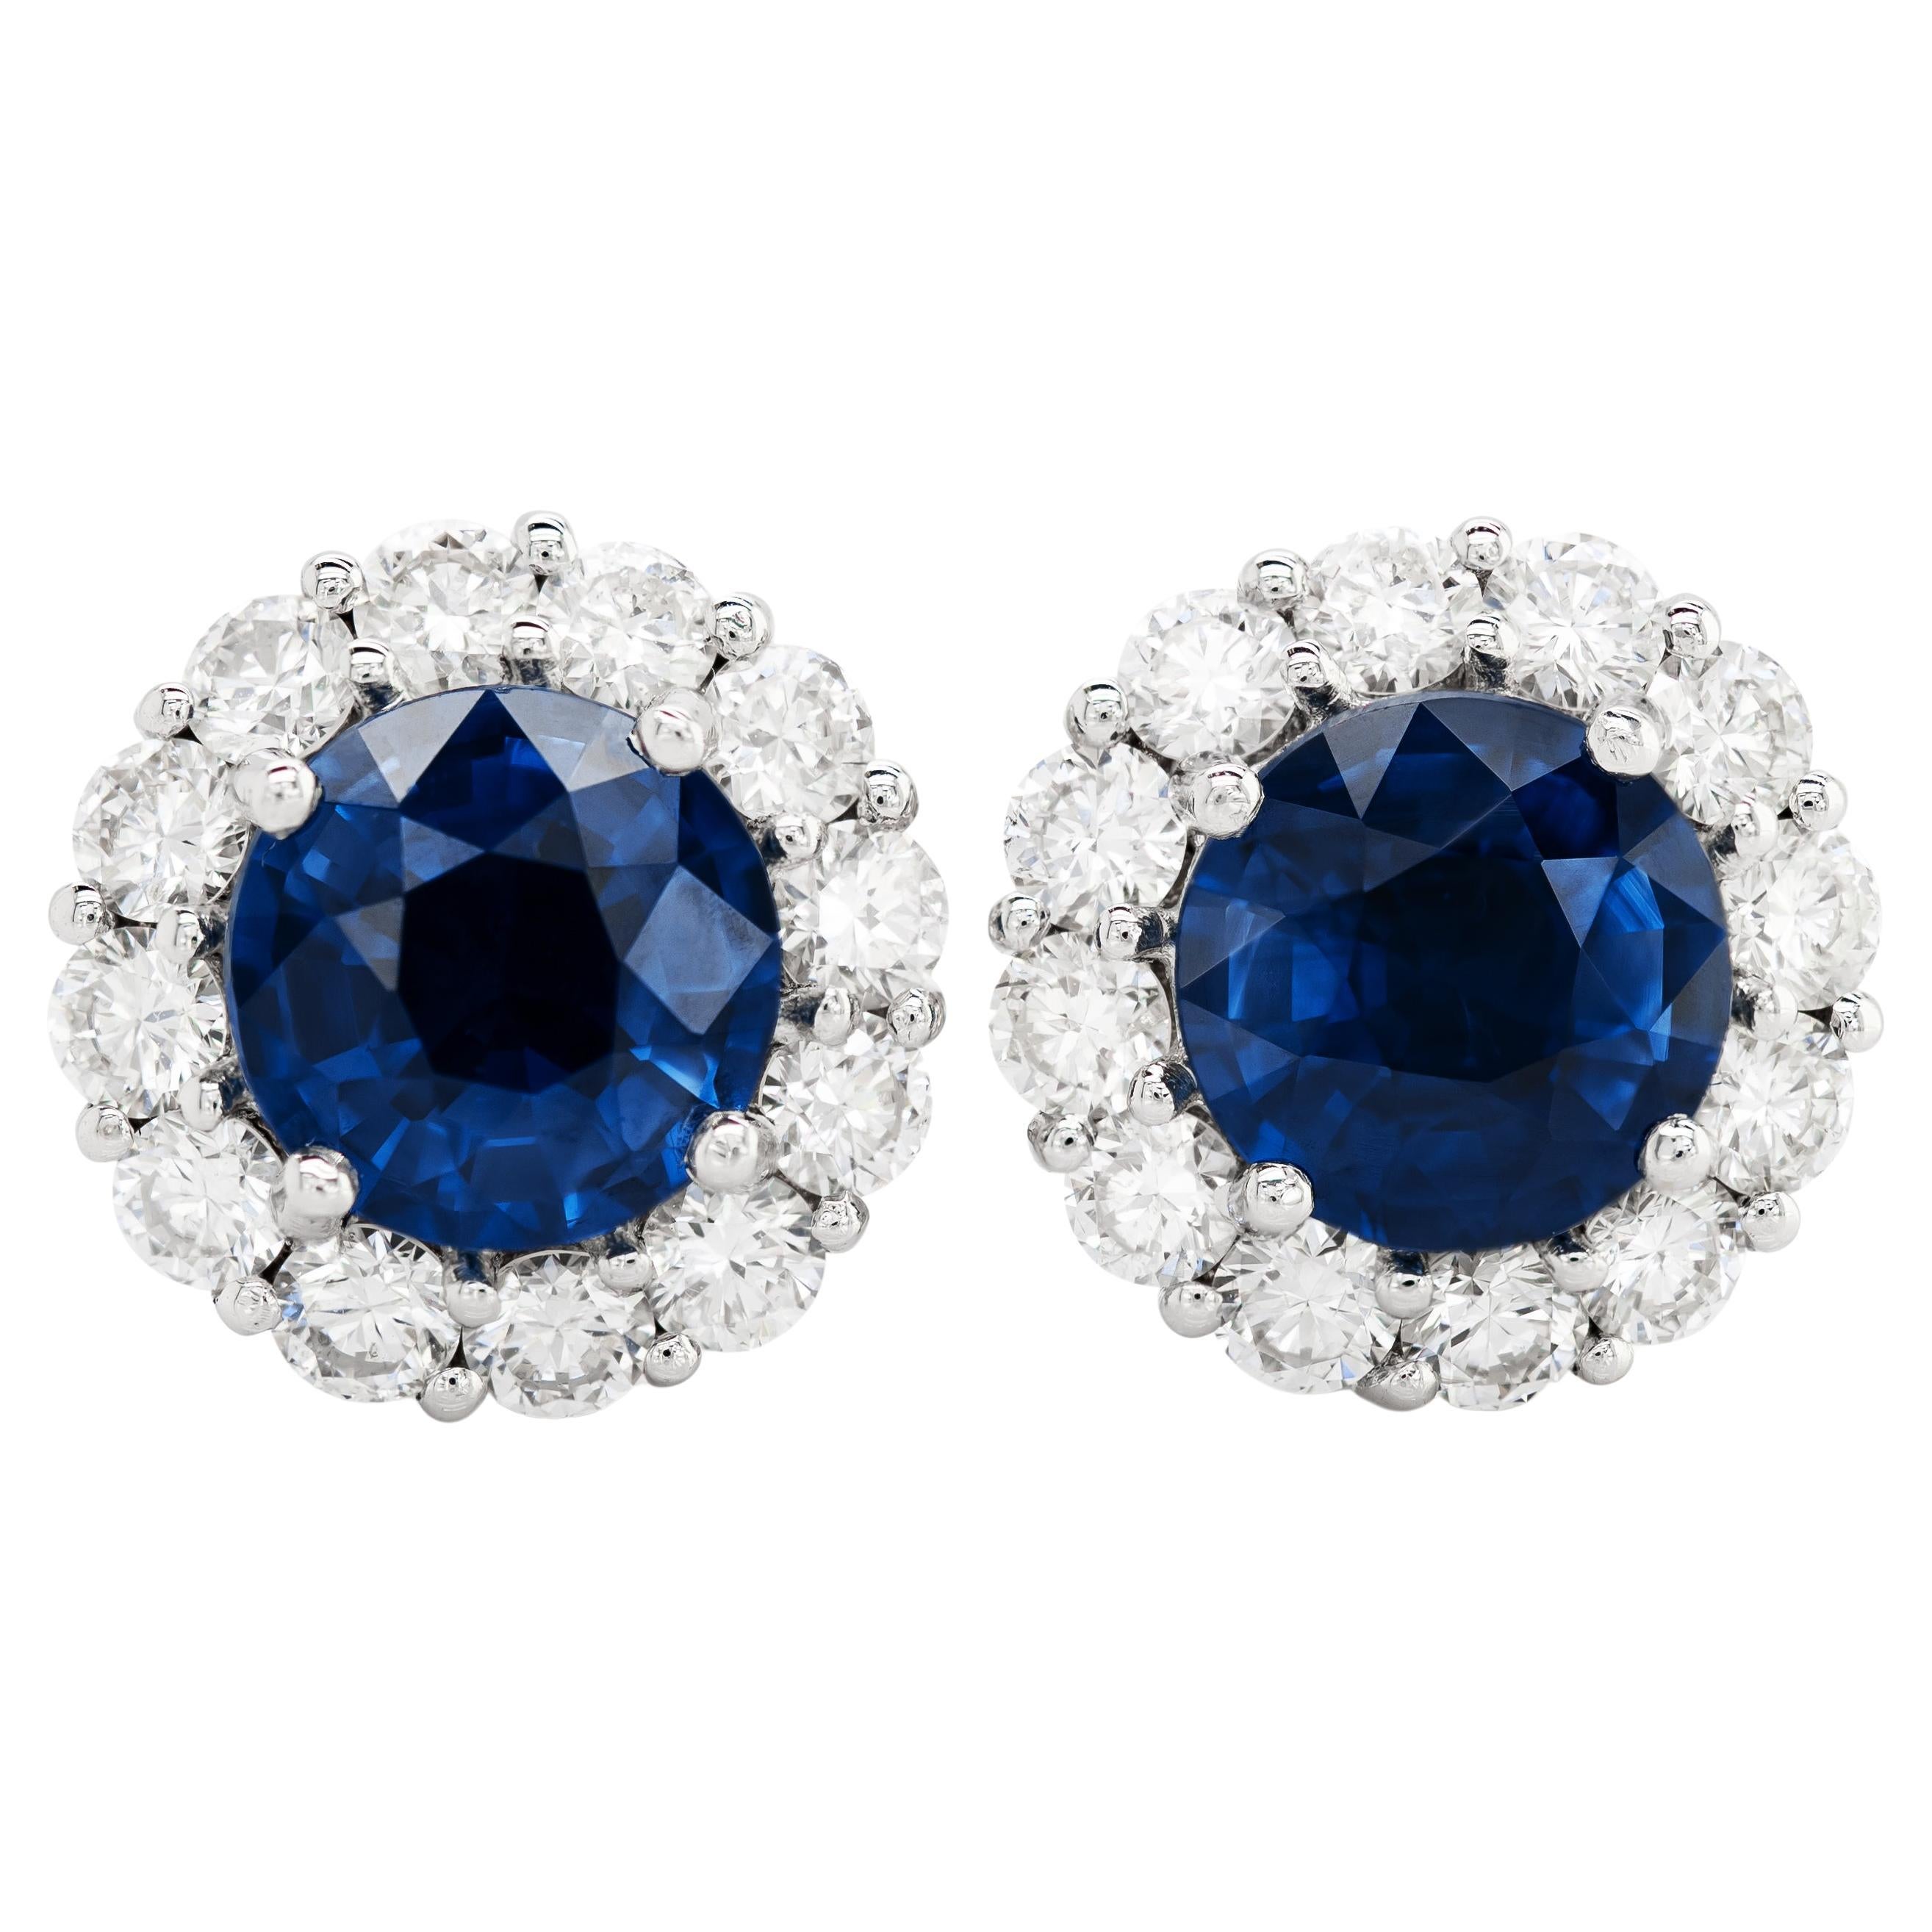 Natural Blue Sapphires 2.60 Carats  set in 18K White Gold Earrings with Diamonds For Sale